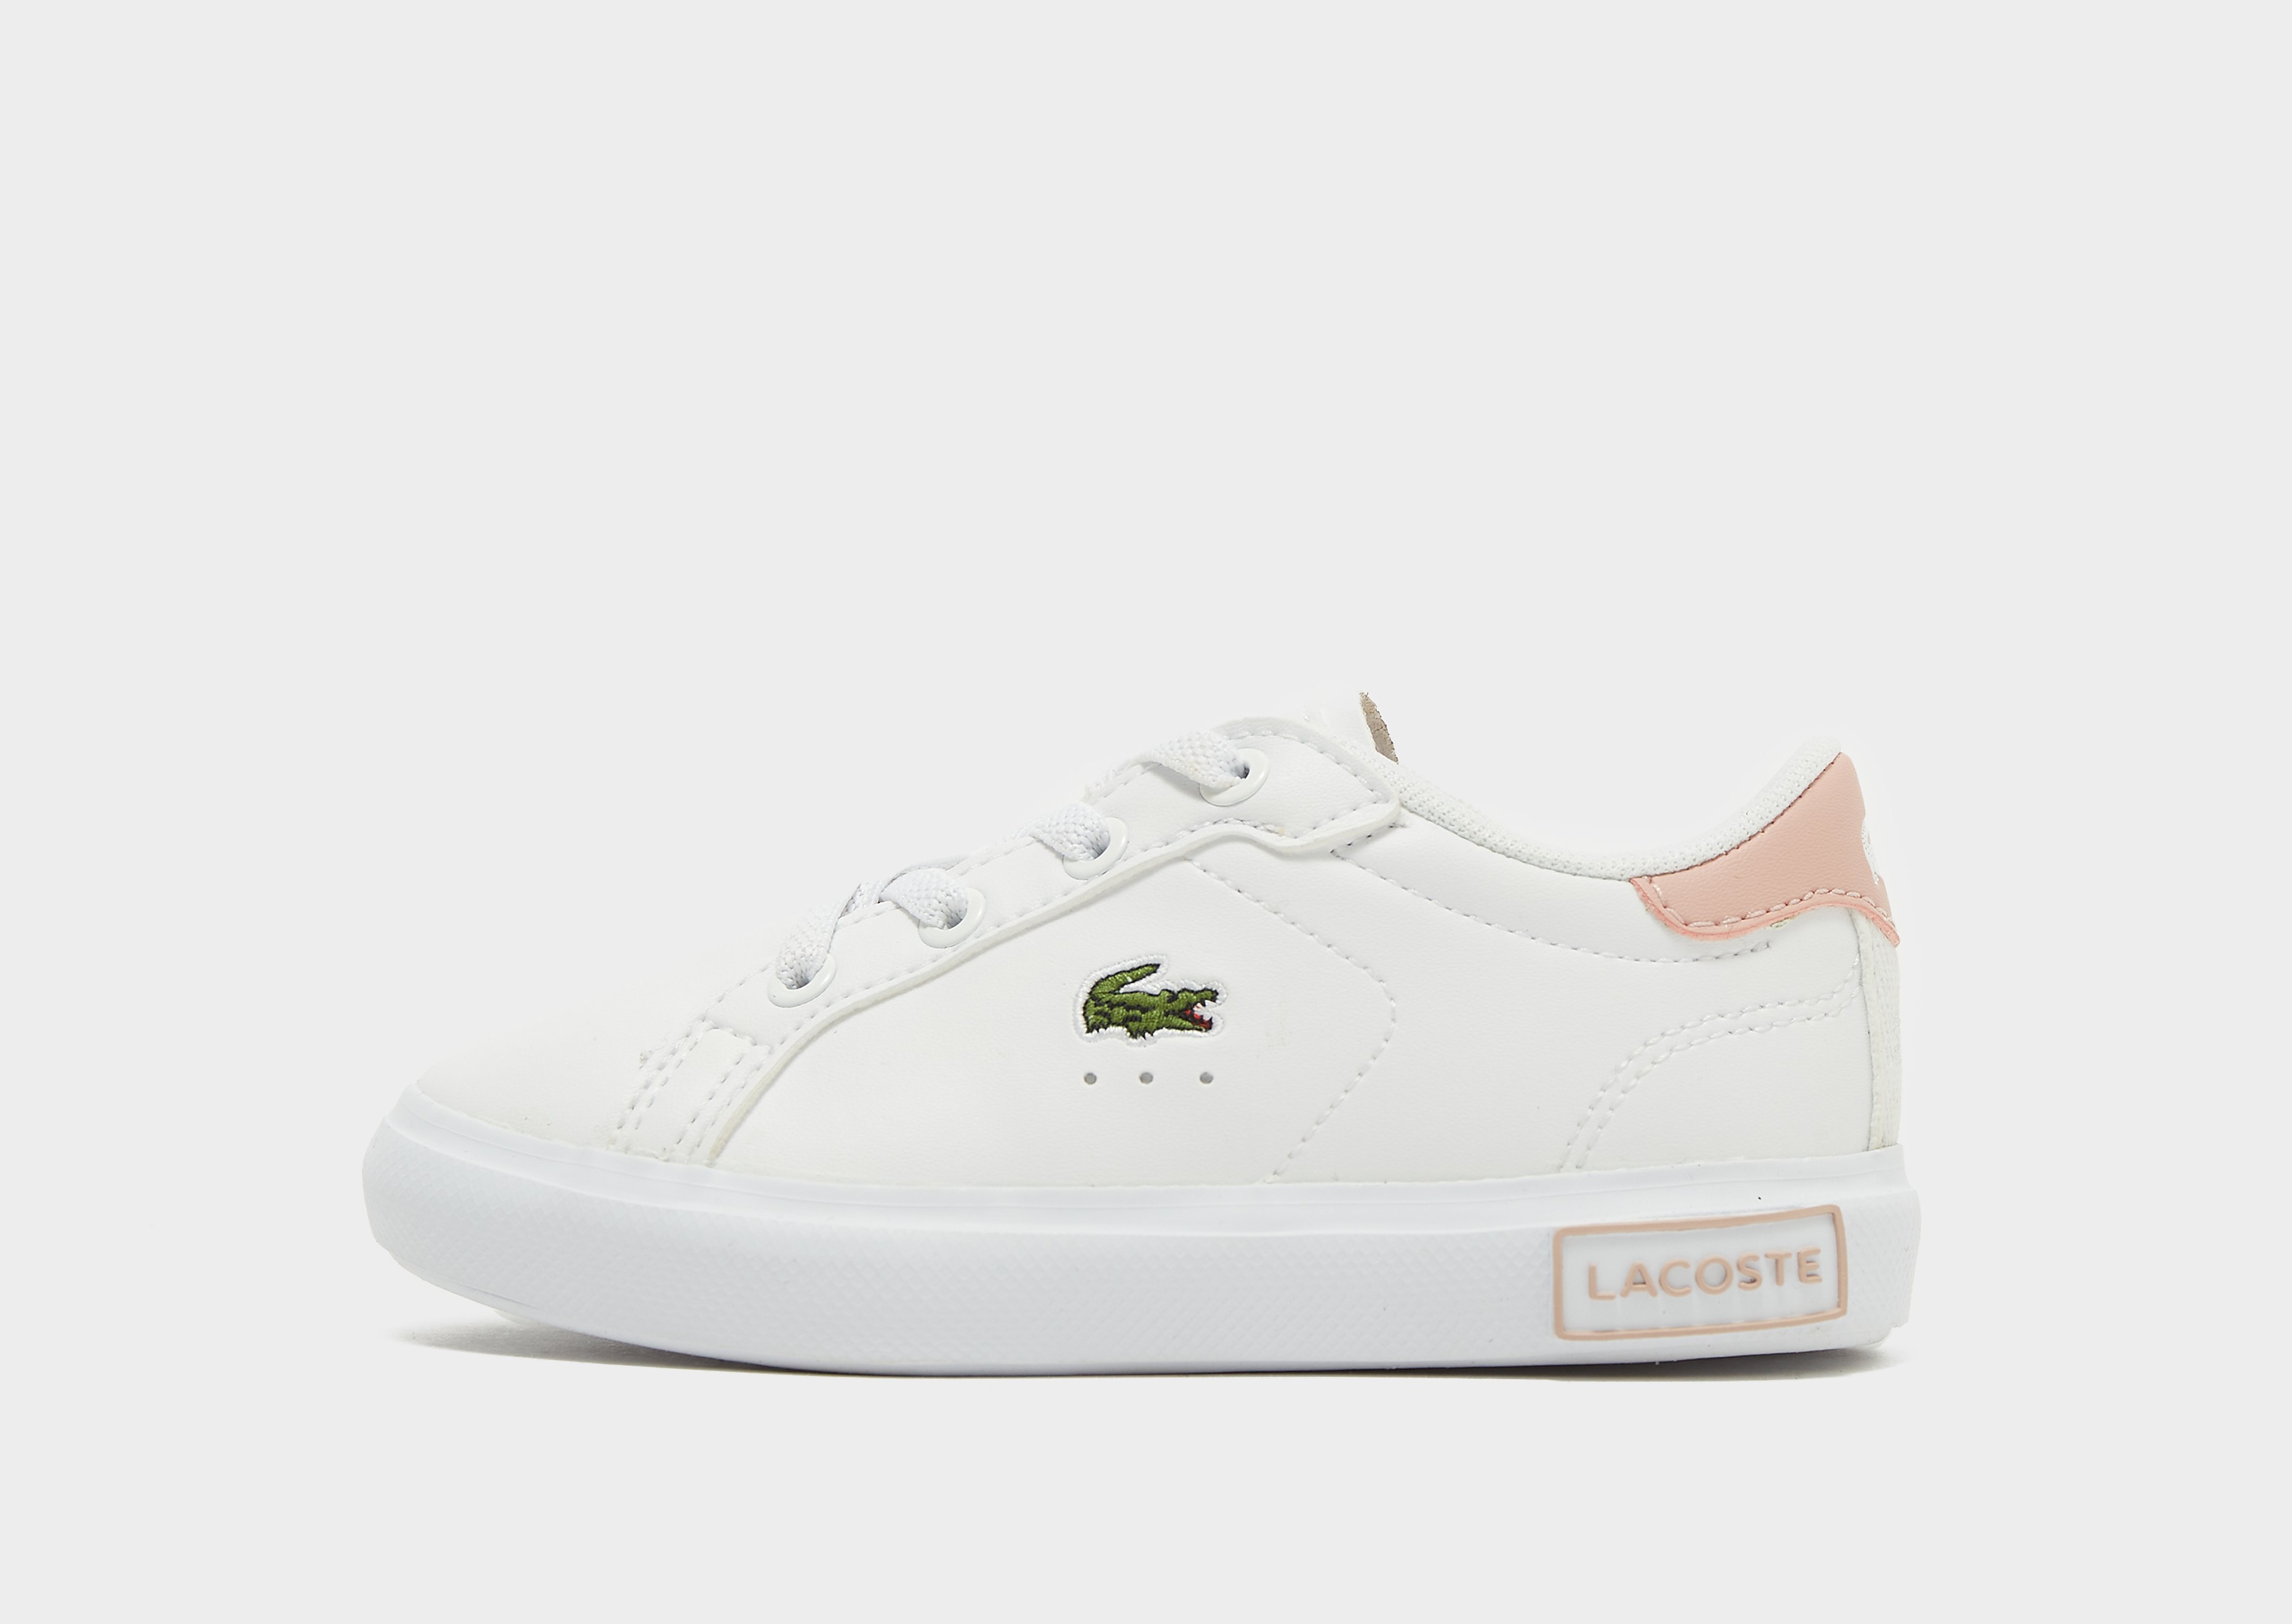 

Lacoste Powercourt Infant - White/BC/RS - Kids, White/BC/RS